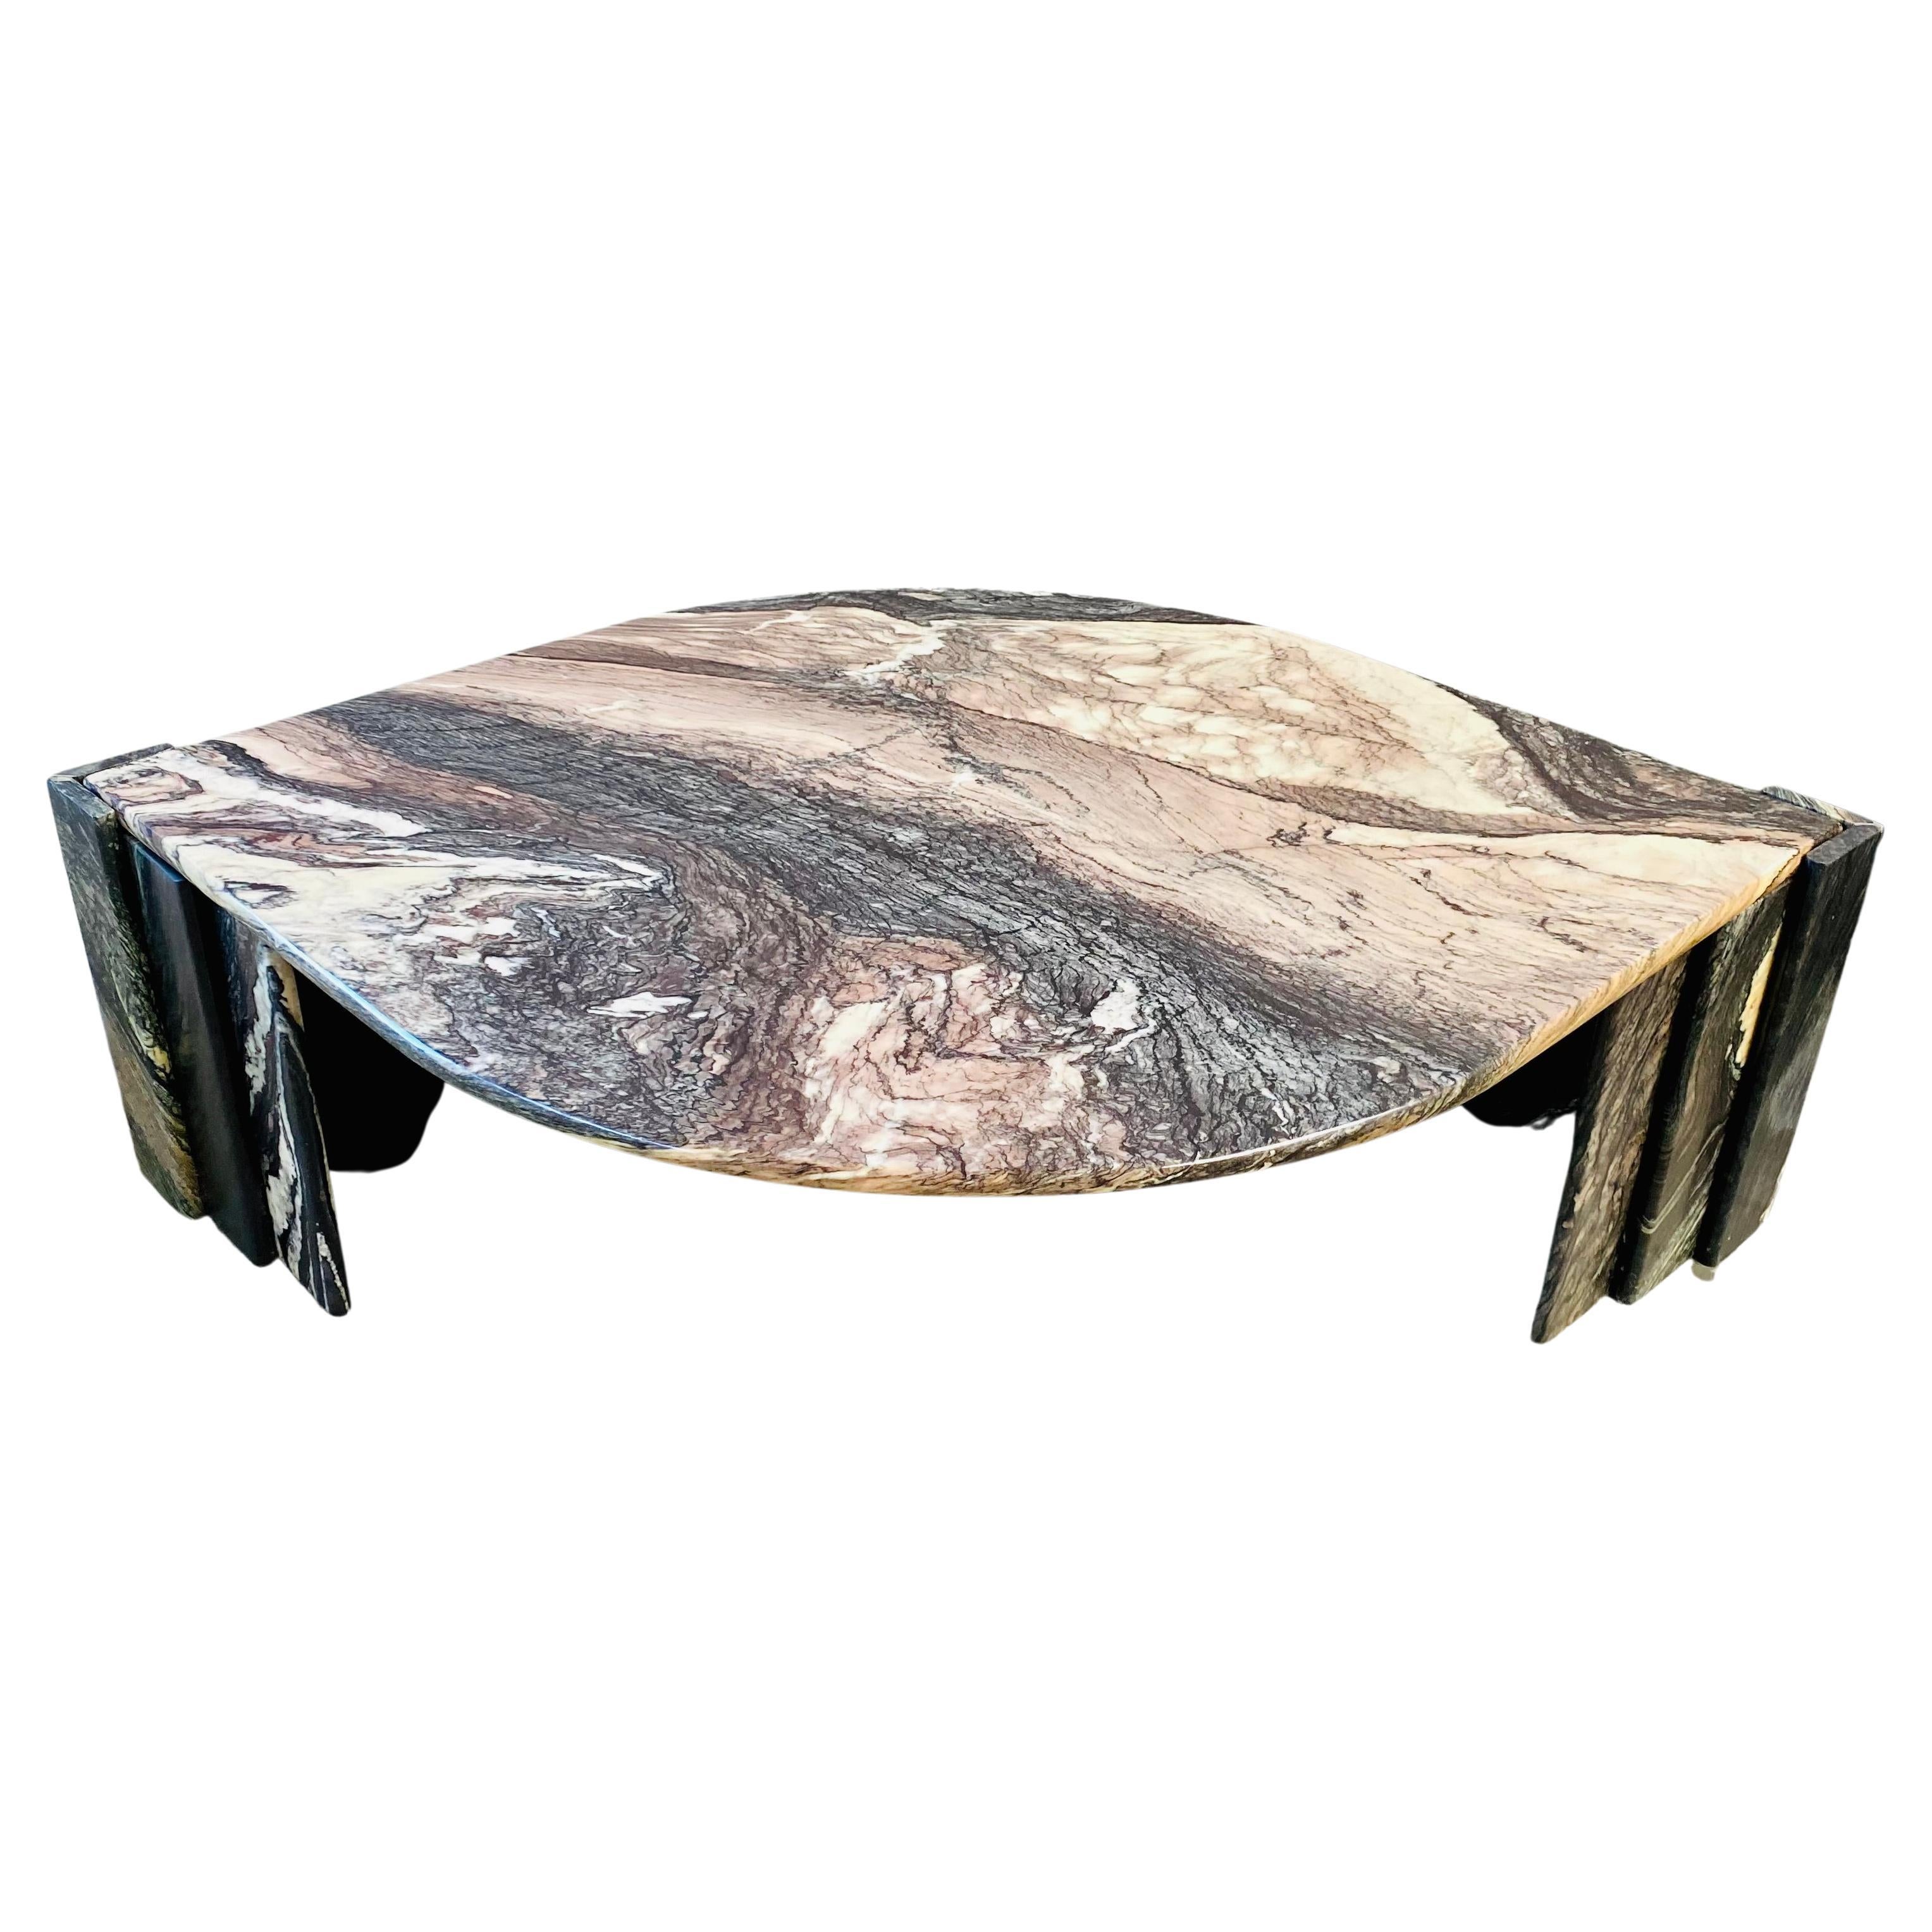 Cipollino marble Coffee Table "Eye" by Roche Bobois, Italy, 1970s